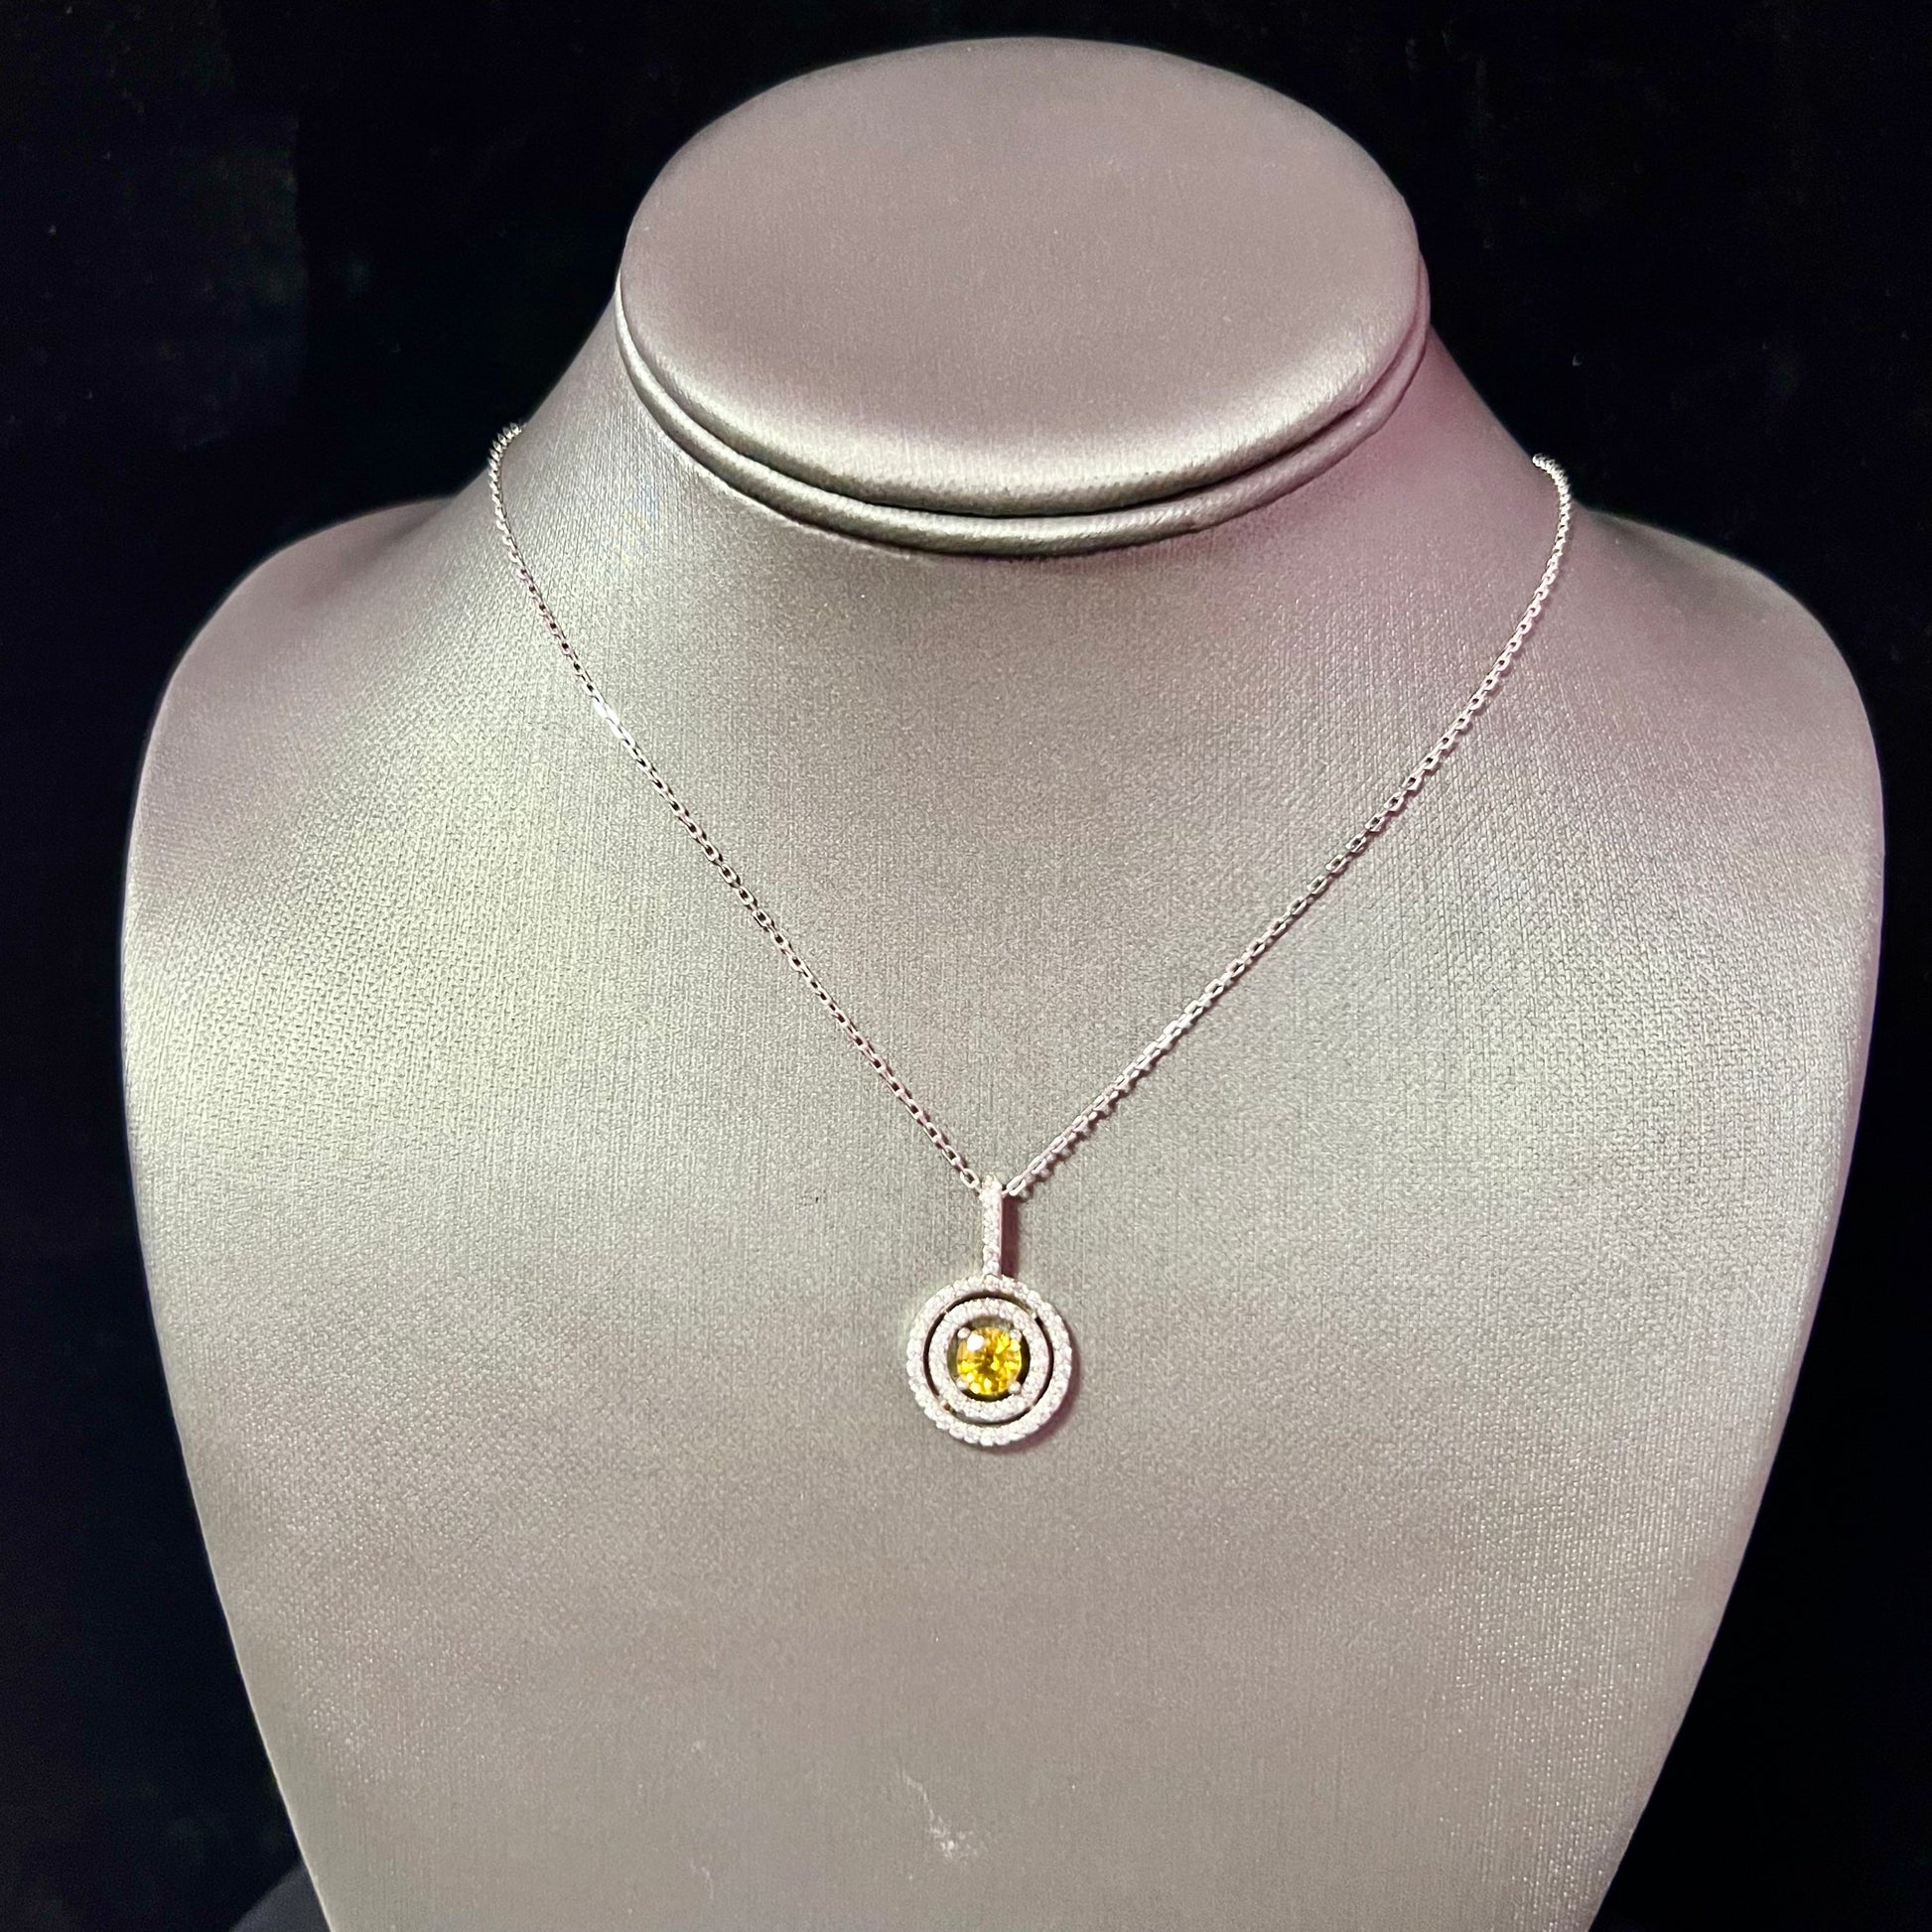 Natural Sapphire Diamond Necklace 18" 14k Gold 1.51 TCW Certified $4,950 215426 - Certified Estate Jewelry